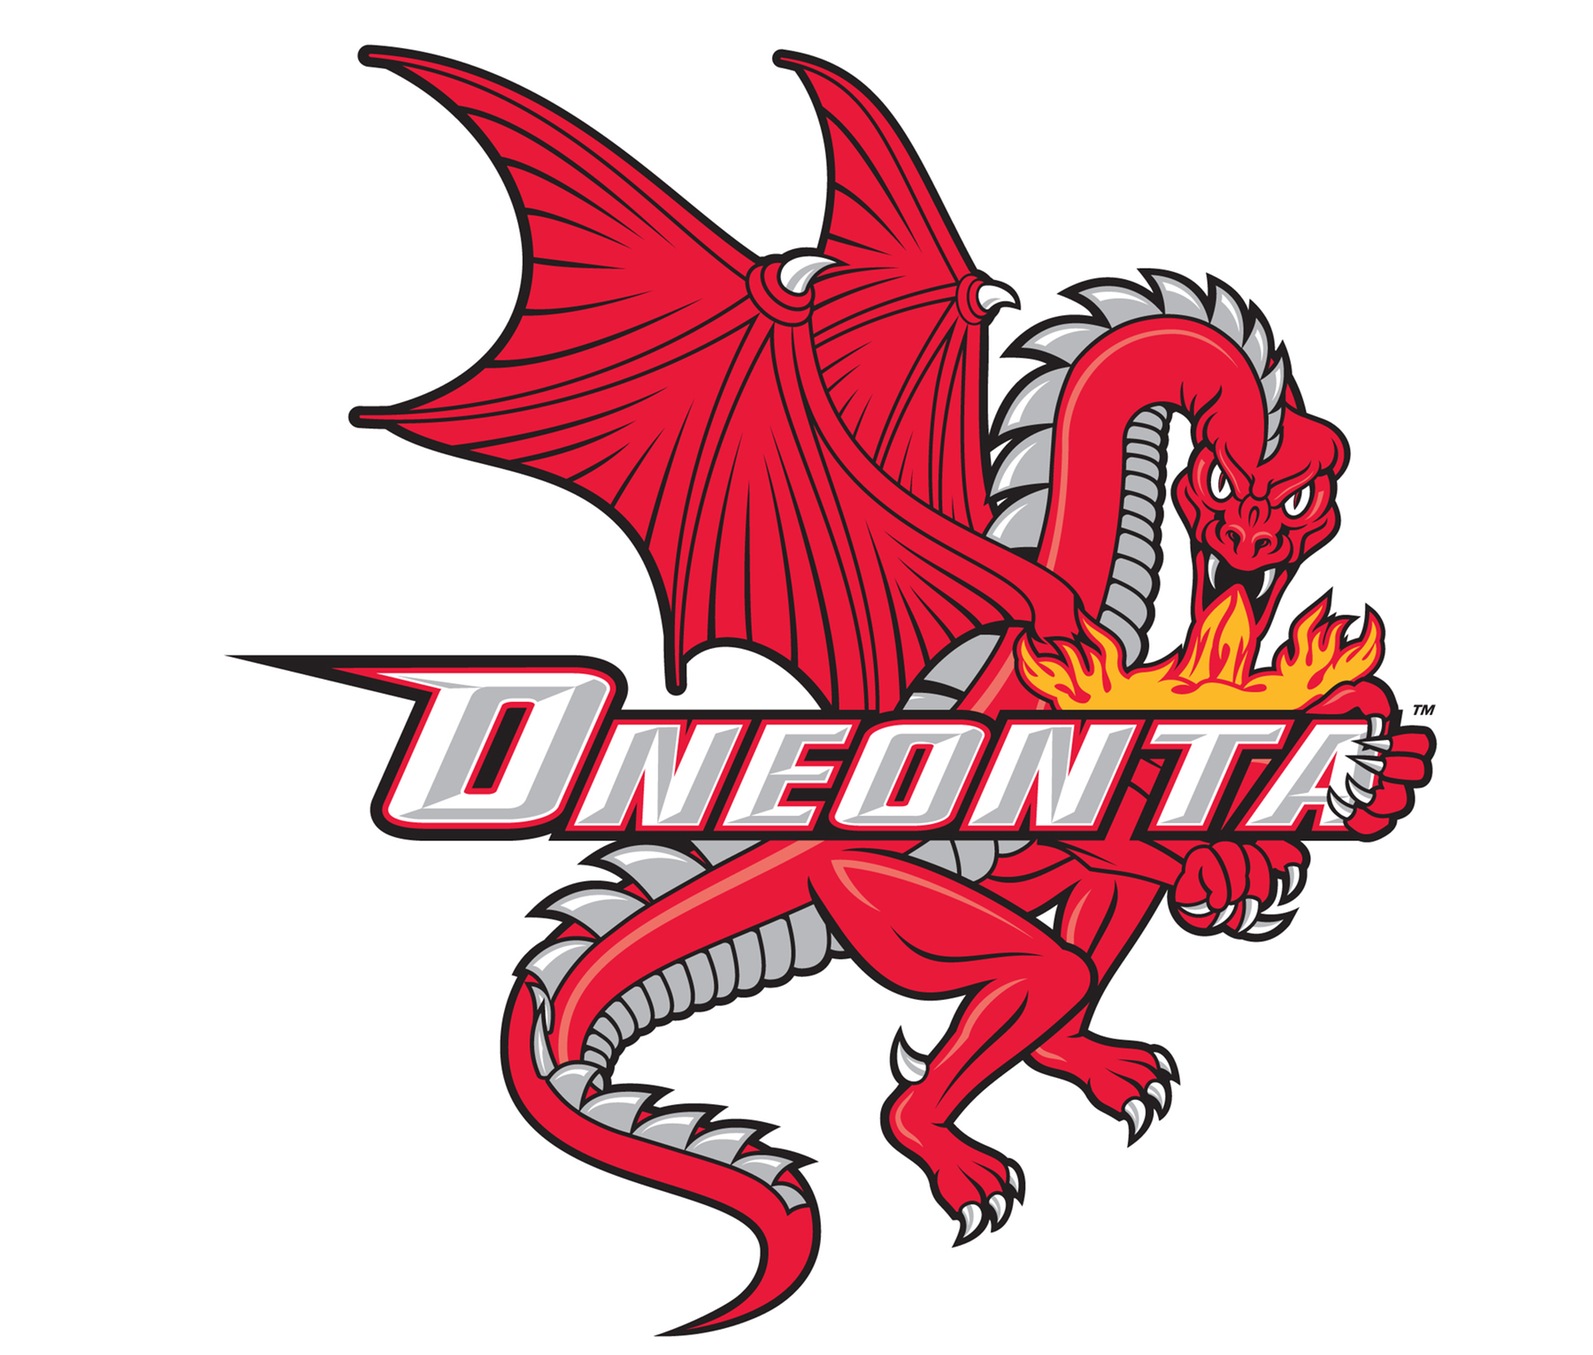 Feature Friday: Oneonta Women's Soccer